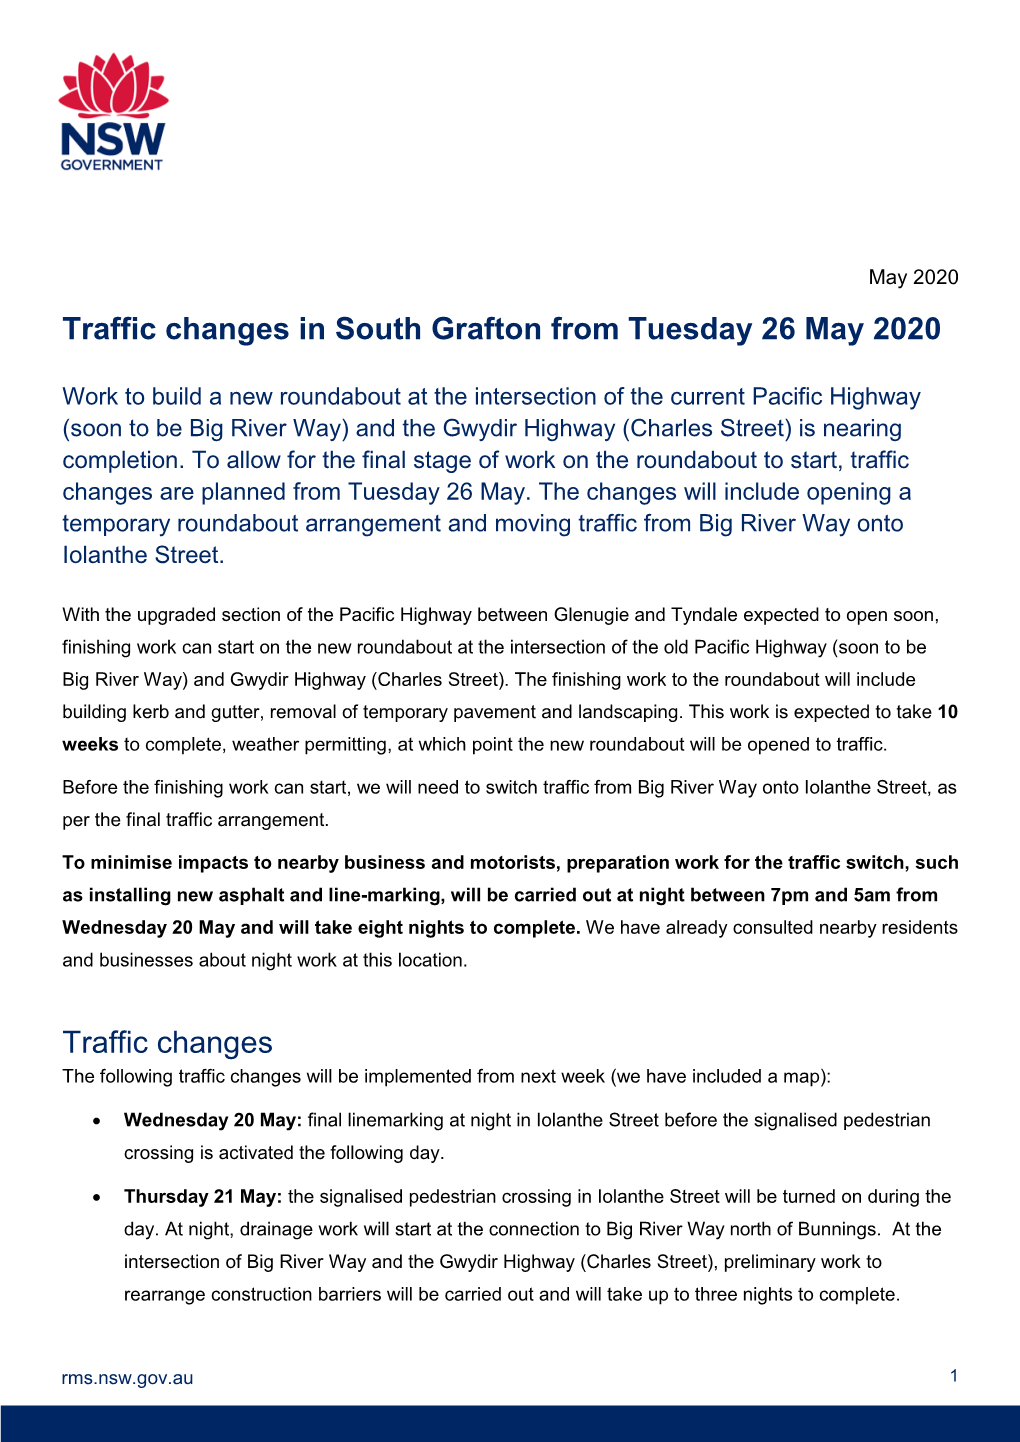 Traffic Changes in South Grafton from Tuesday 26 May 2020